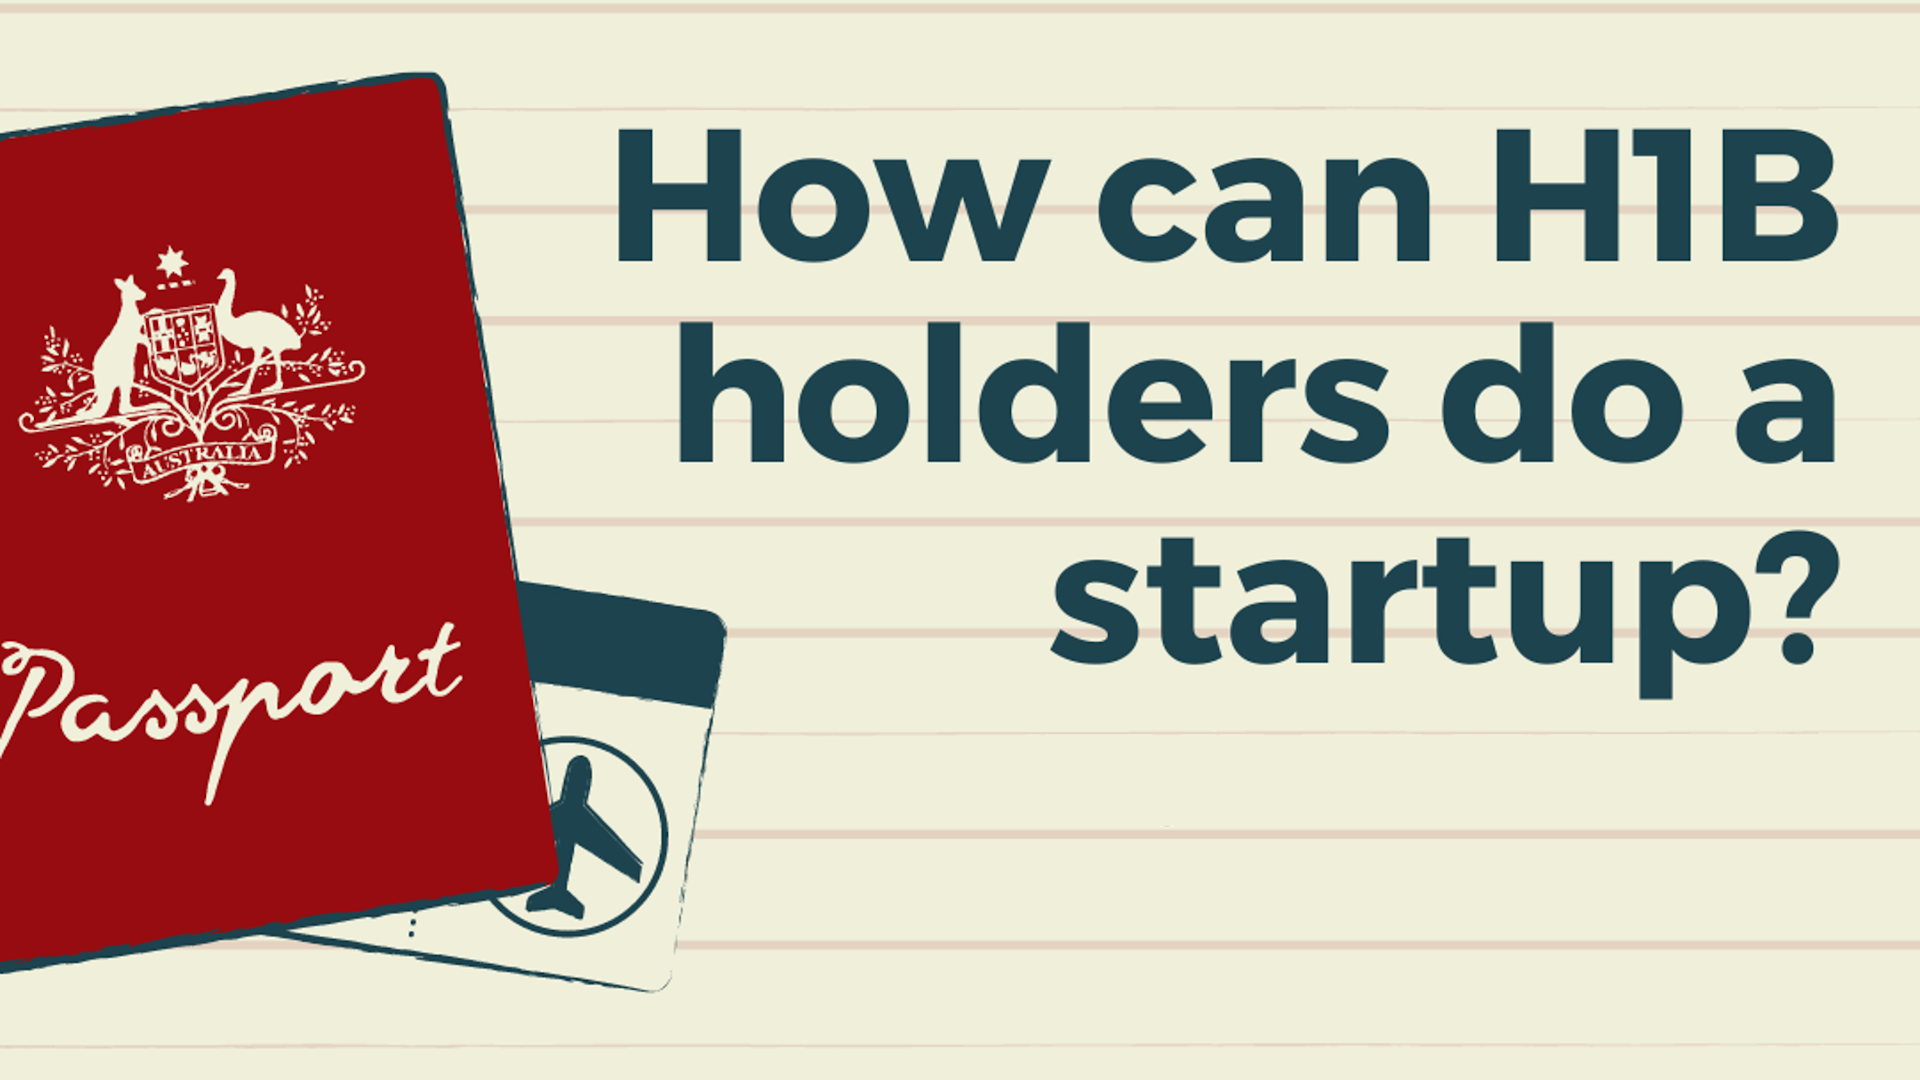 How can H1B (visa) holders do a startup?